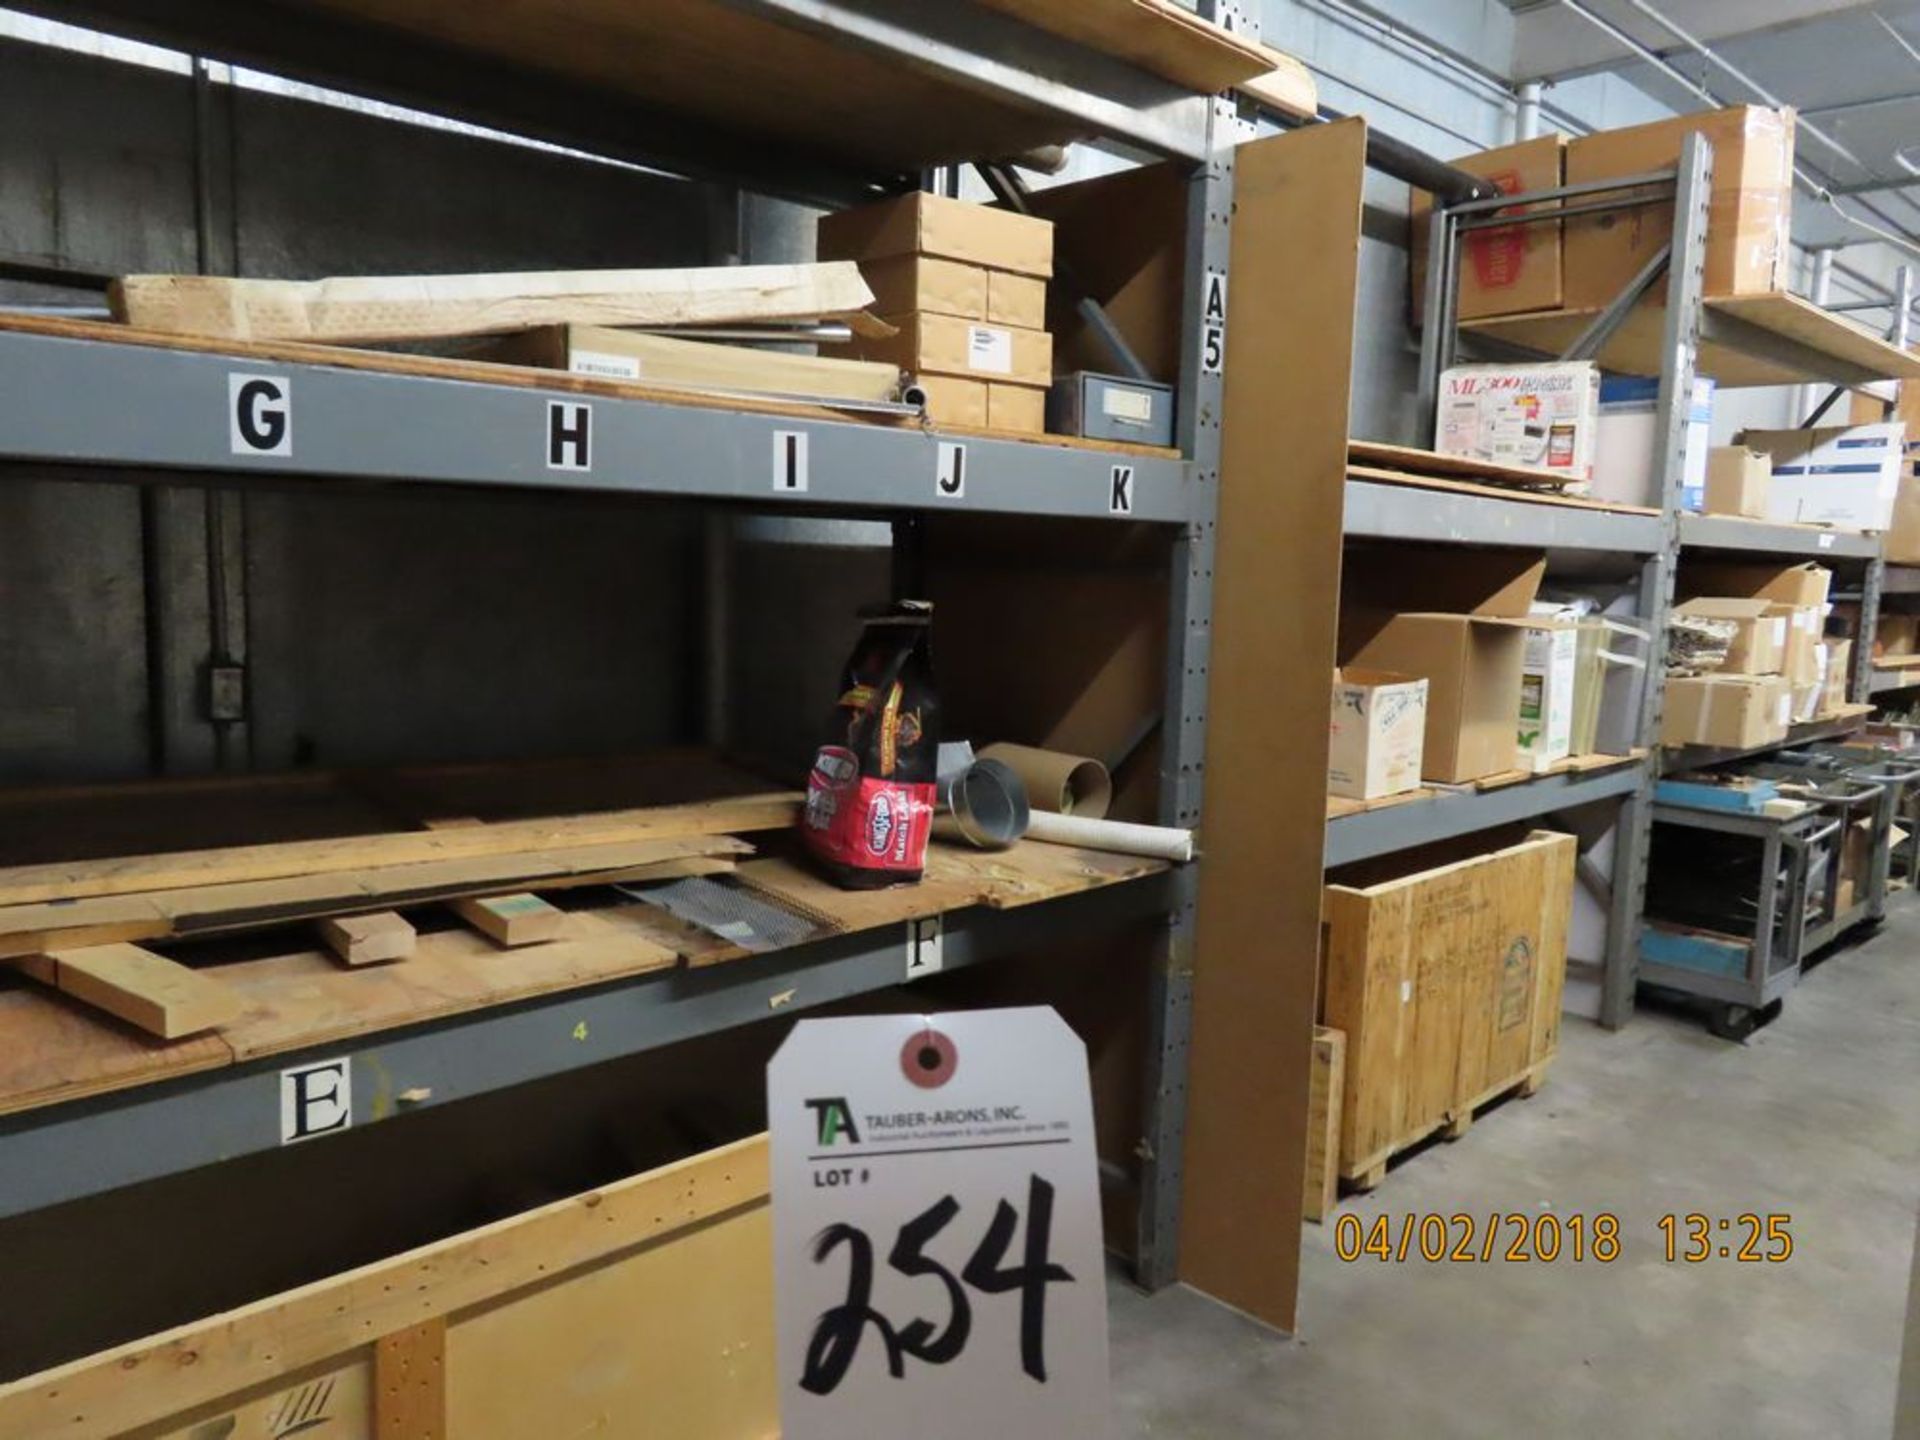 (Lot) Contents of Room, Excluding: (2) Pieces of Furniture & Ladder; Including: Pallet Racking, - Image 6 of 6